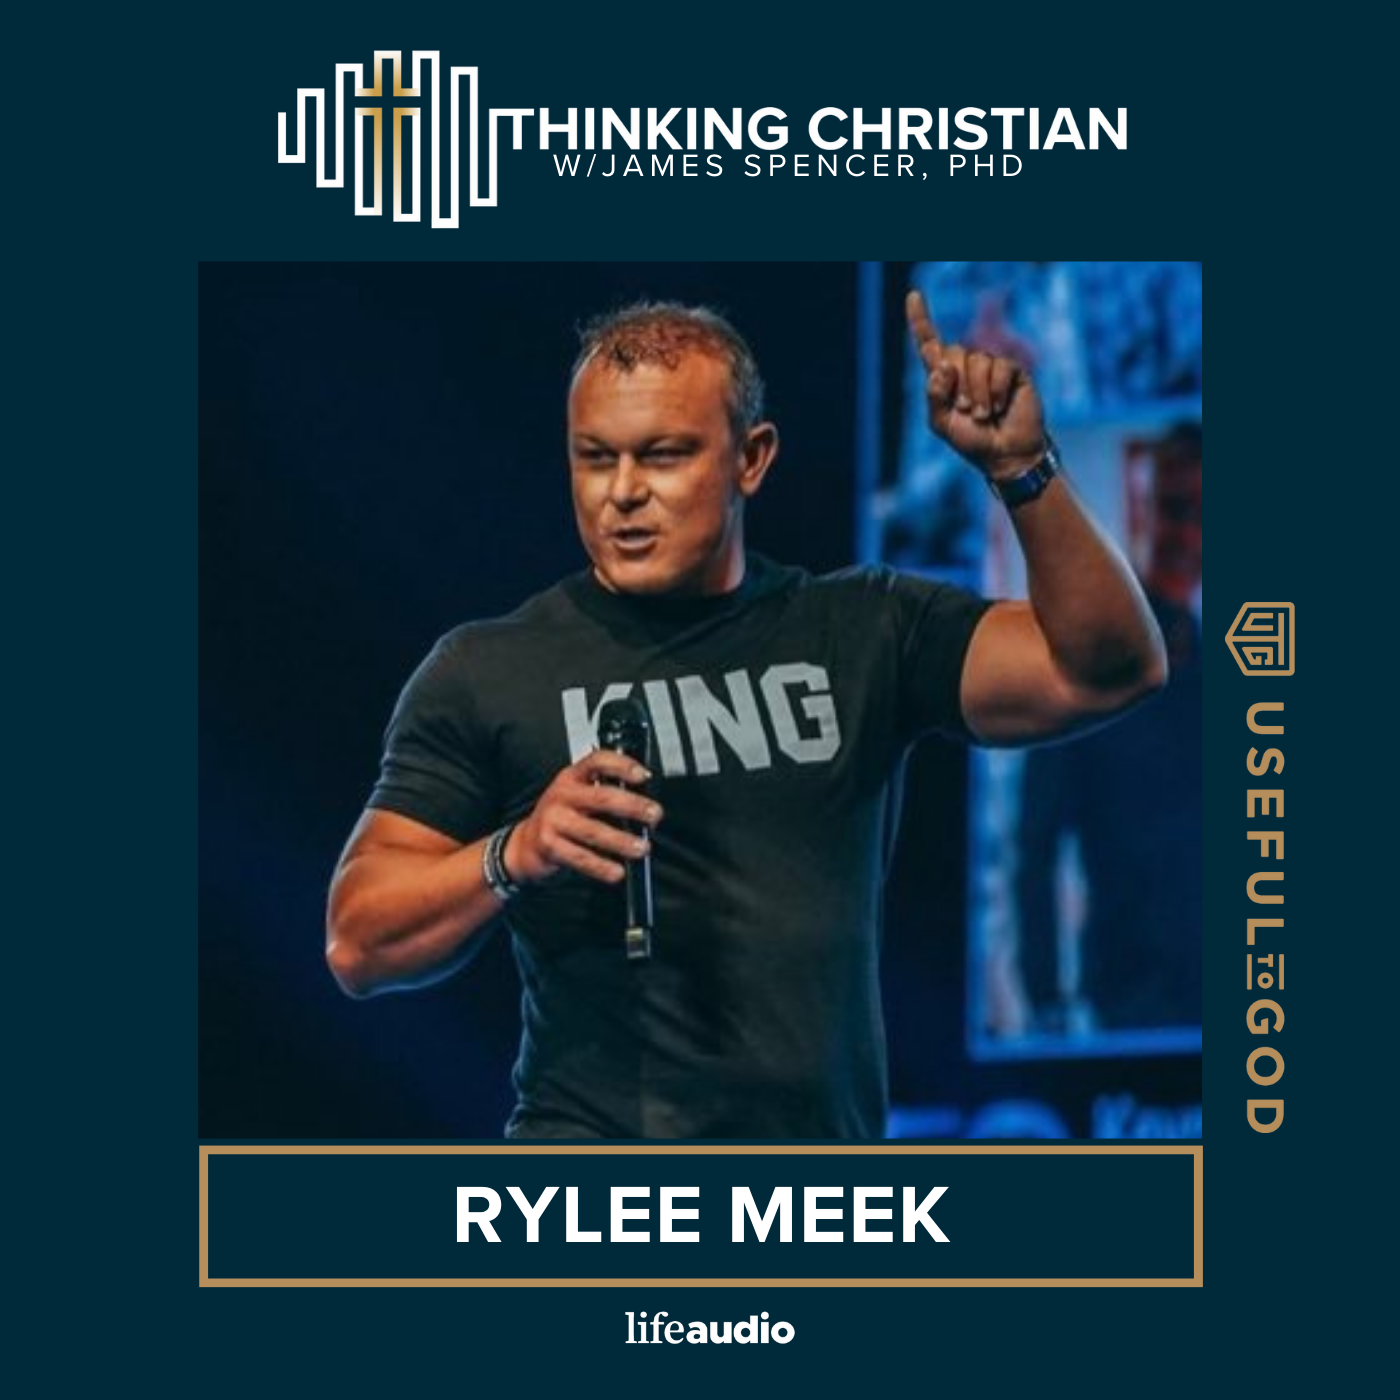 How Should Christians Think about Business and Money? A Conversation with Rylee Meek, Part 2